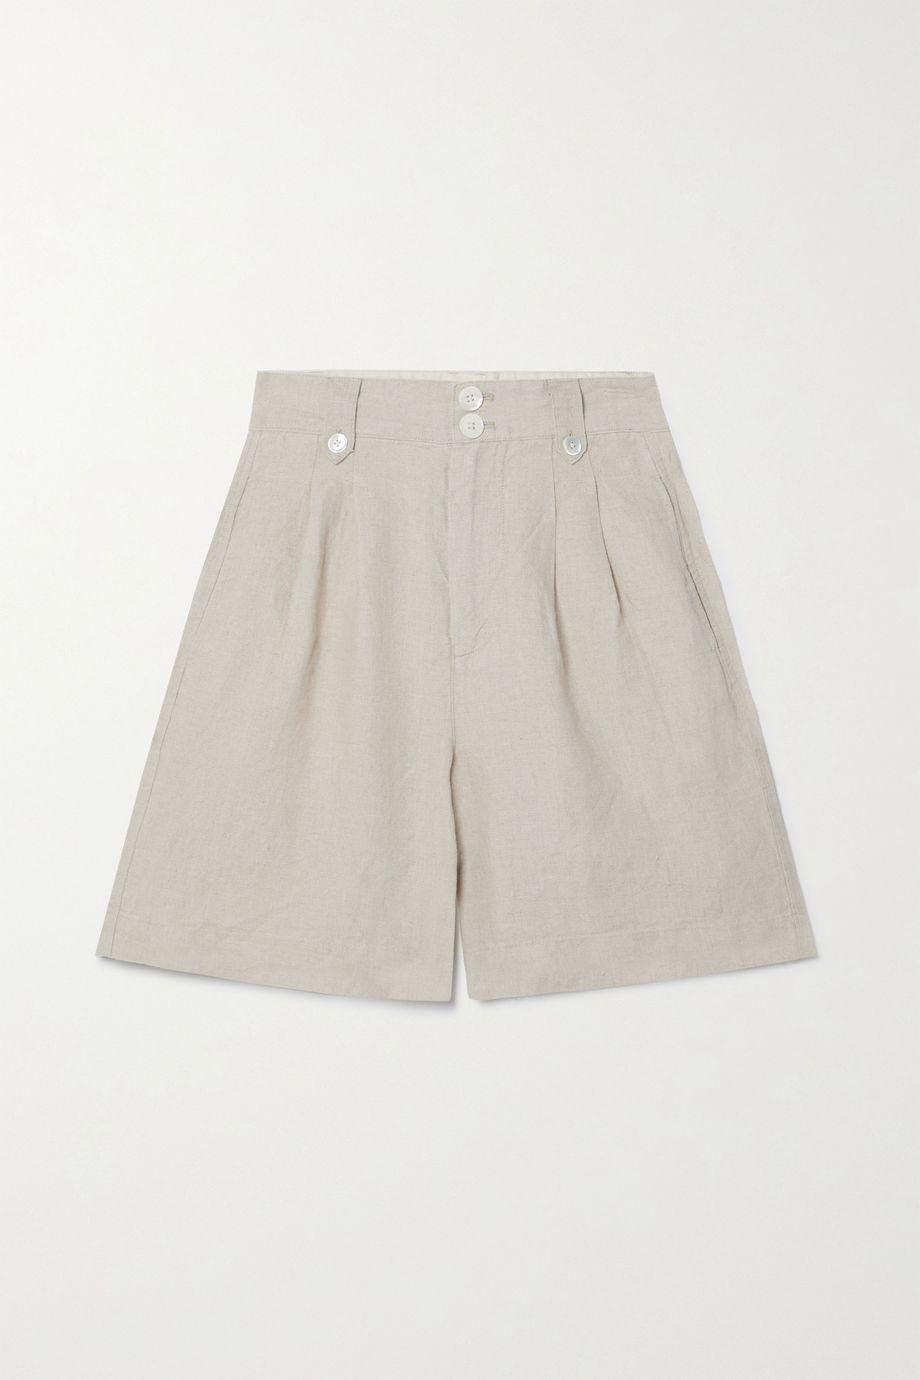 Pleated linen shorts by ALEX MILL